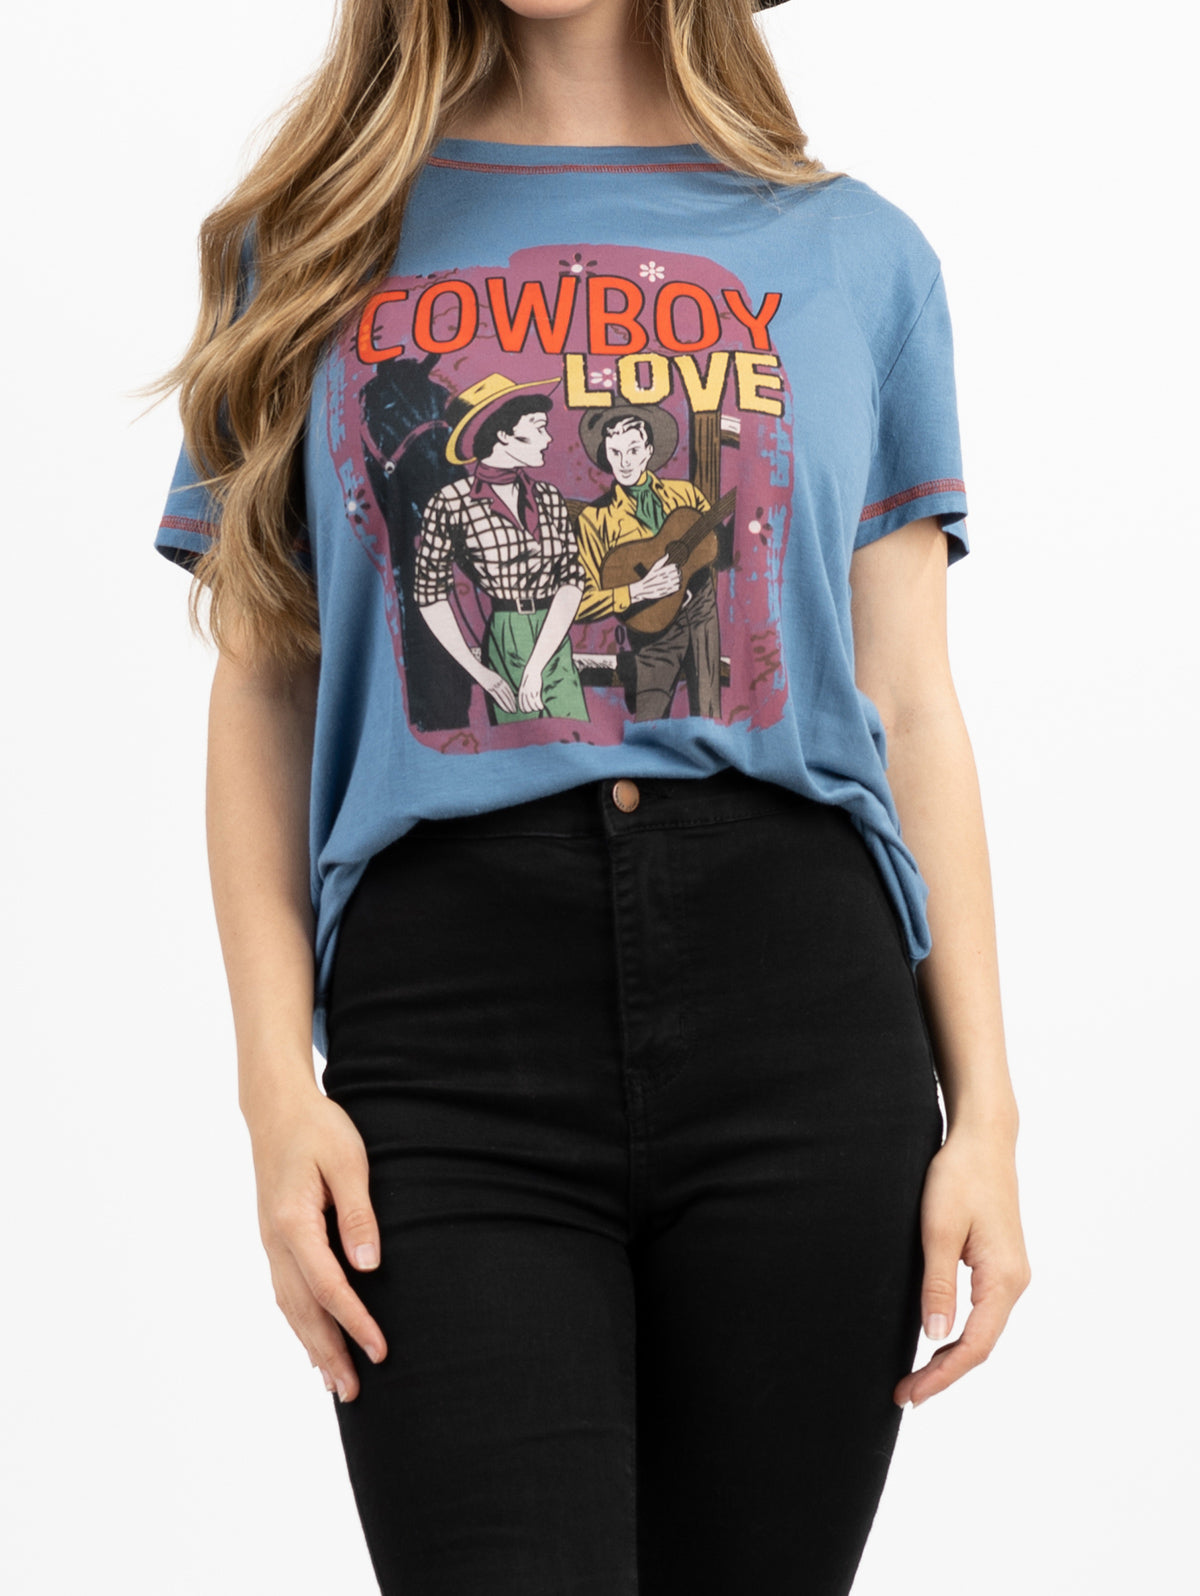 Women's Mineral Wash Contrast Stitched CowBoy Love Graphic Short Sleeve Tee - Cowgirl Wear